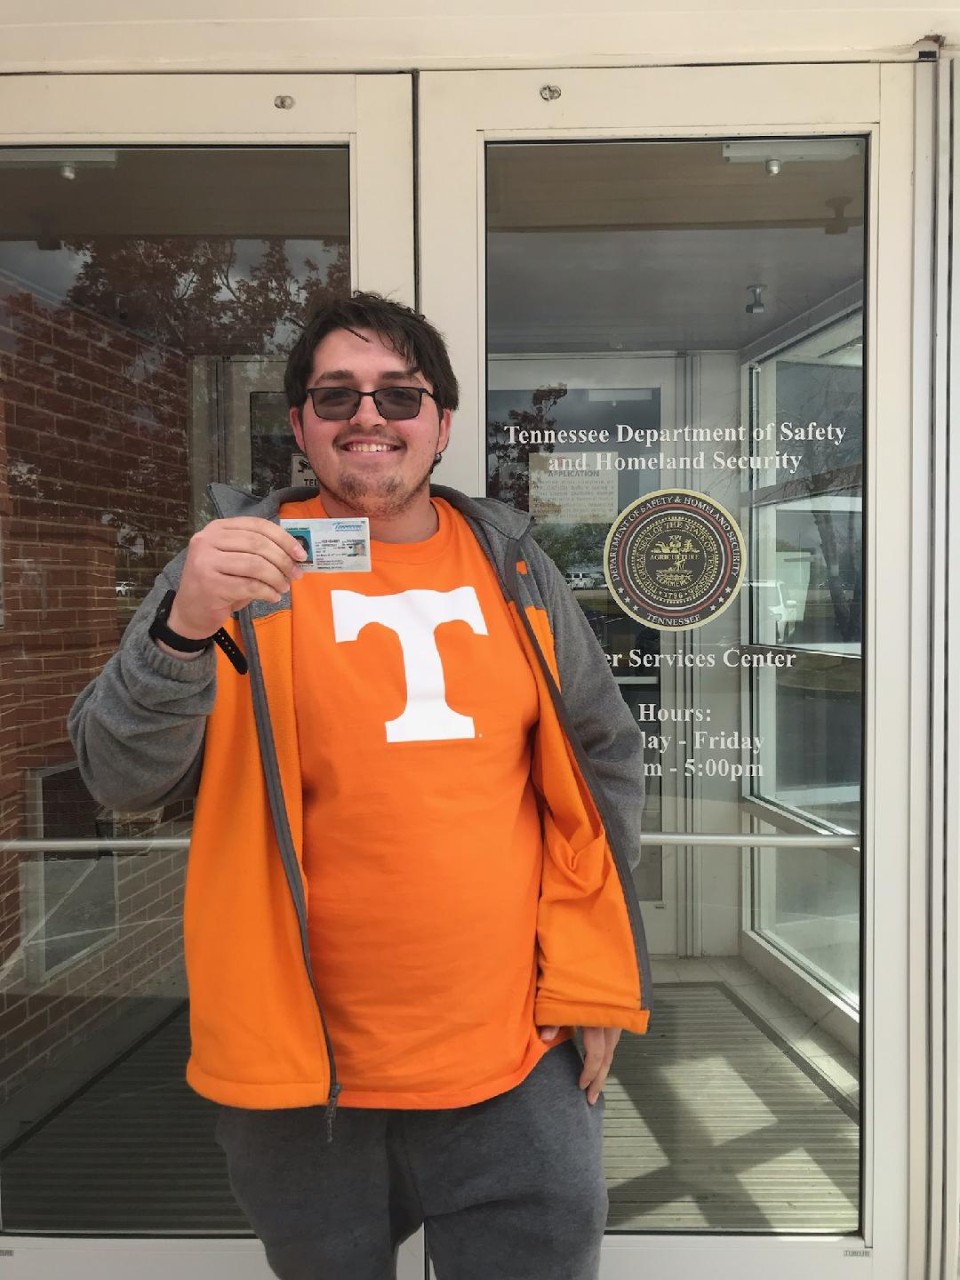 young white man with brown hair wearing an orange University of TN and jacket, holding up his student ID